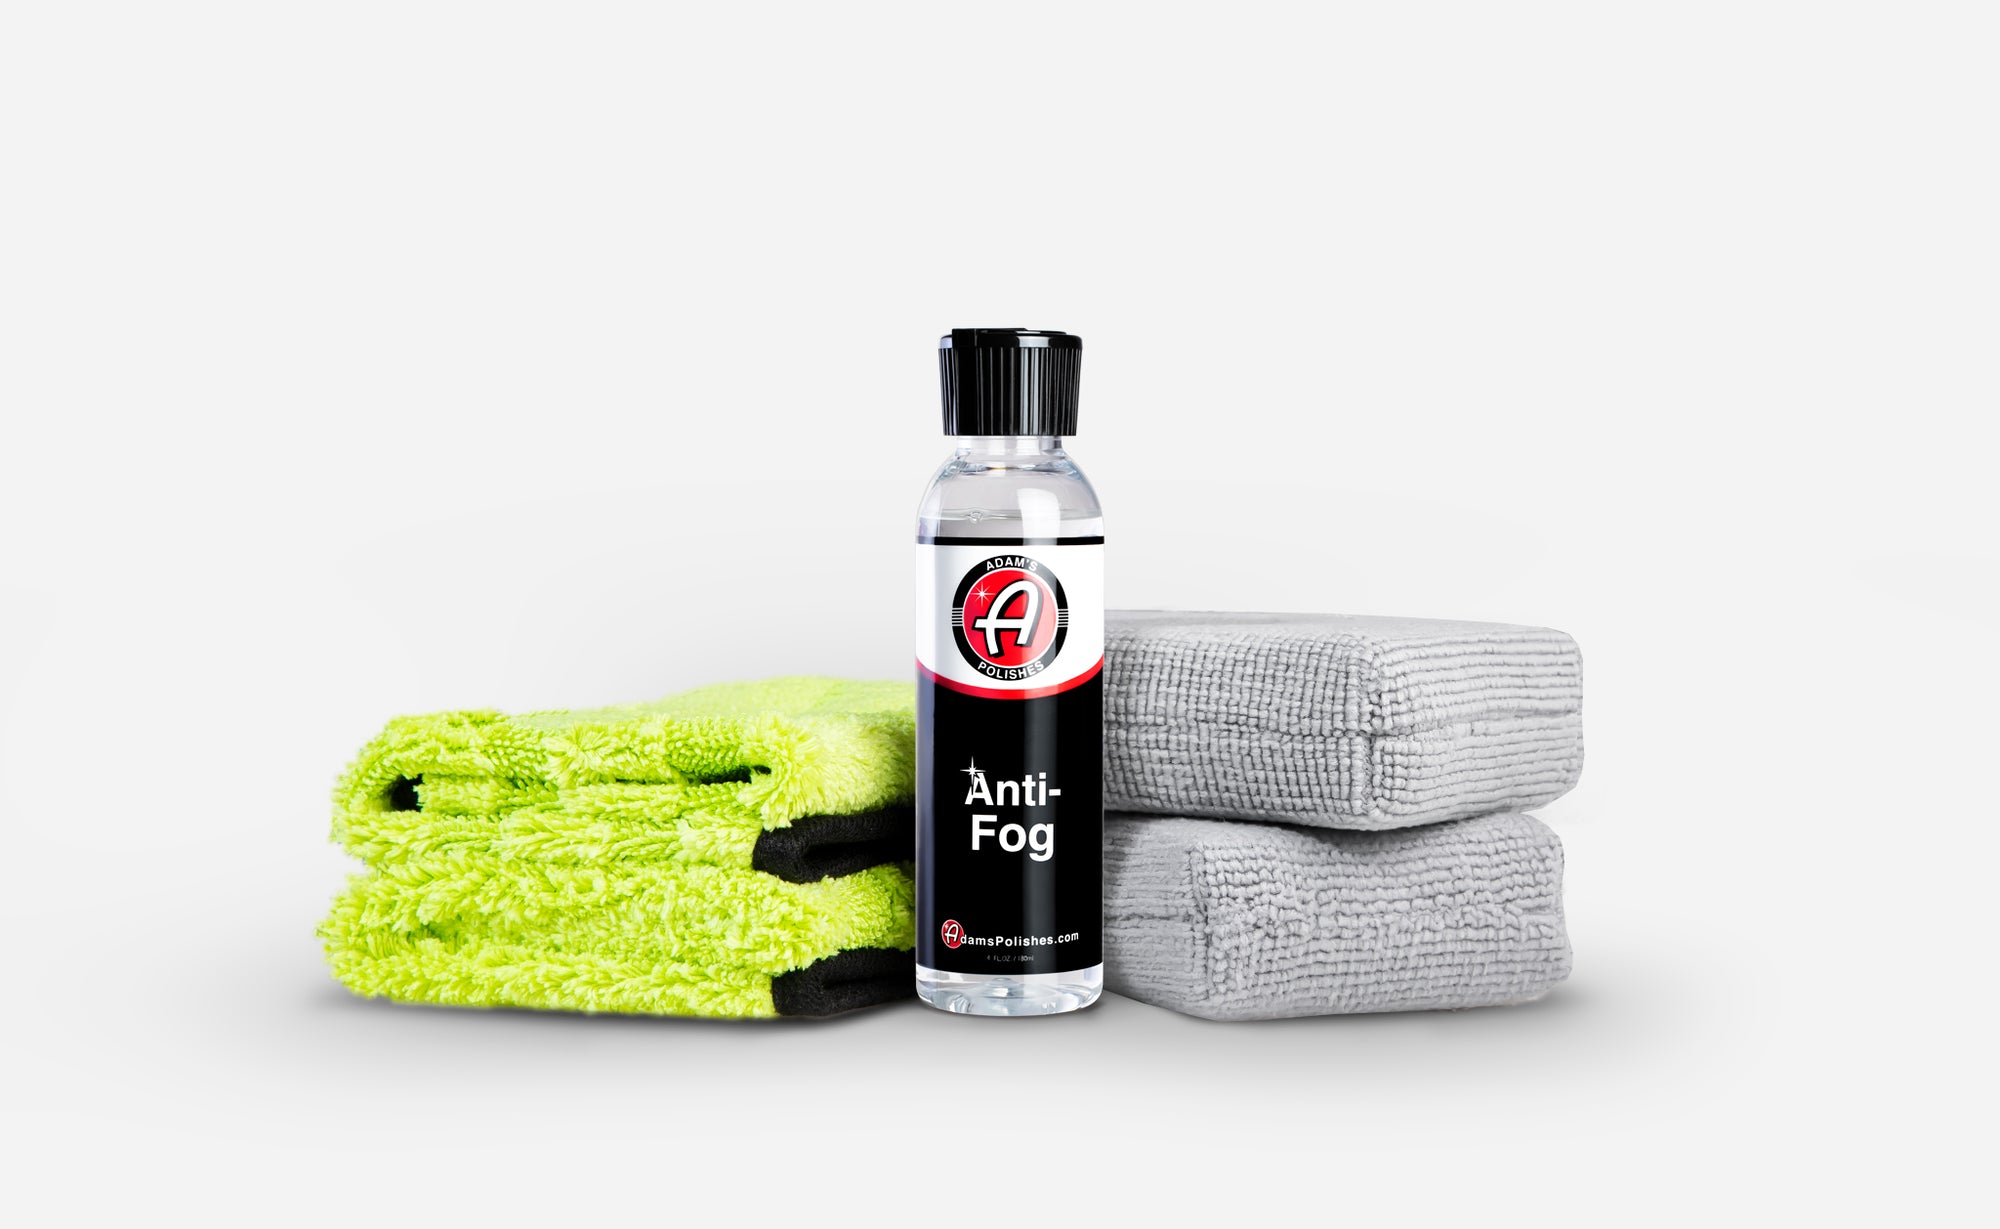 How To Keep Your Cars Interior Clean With Adams Polishes - Jay Flat Out 